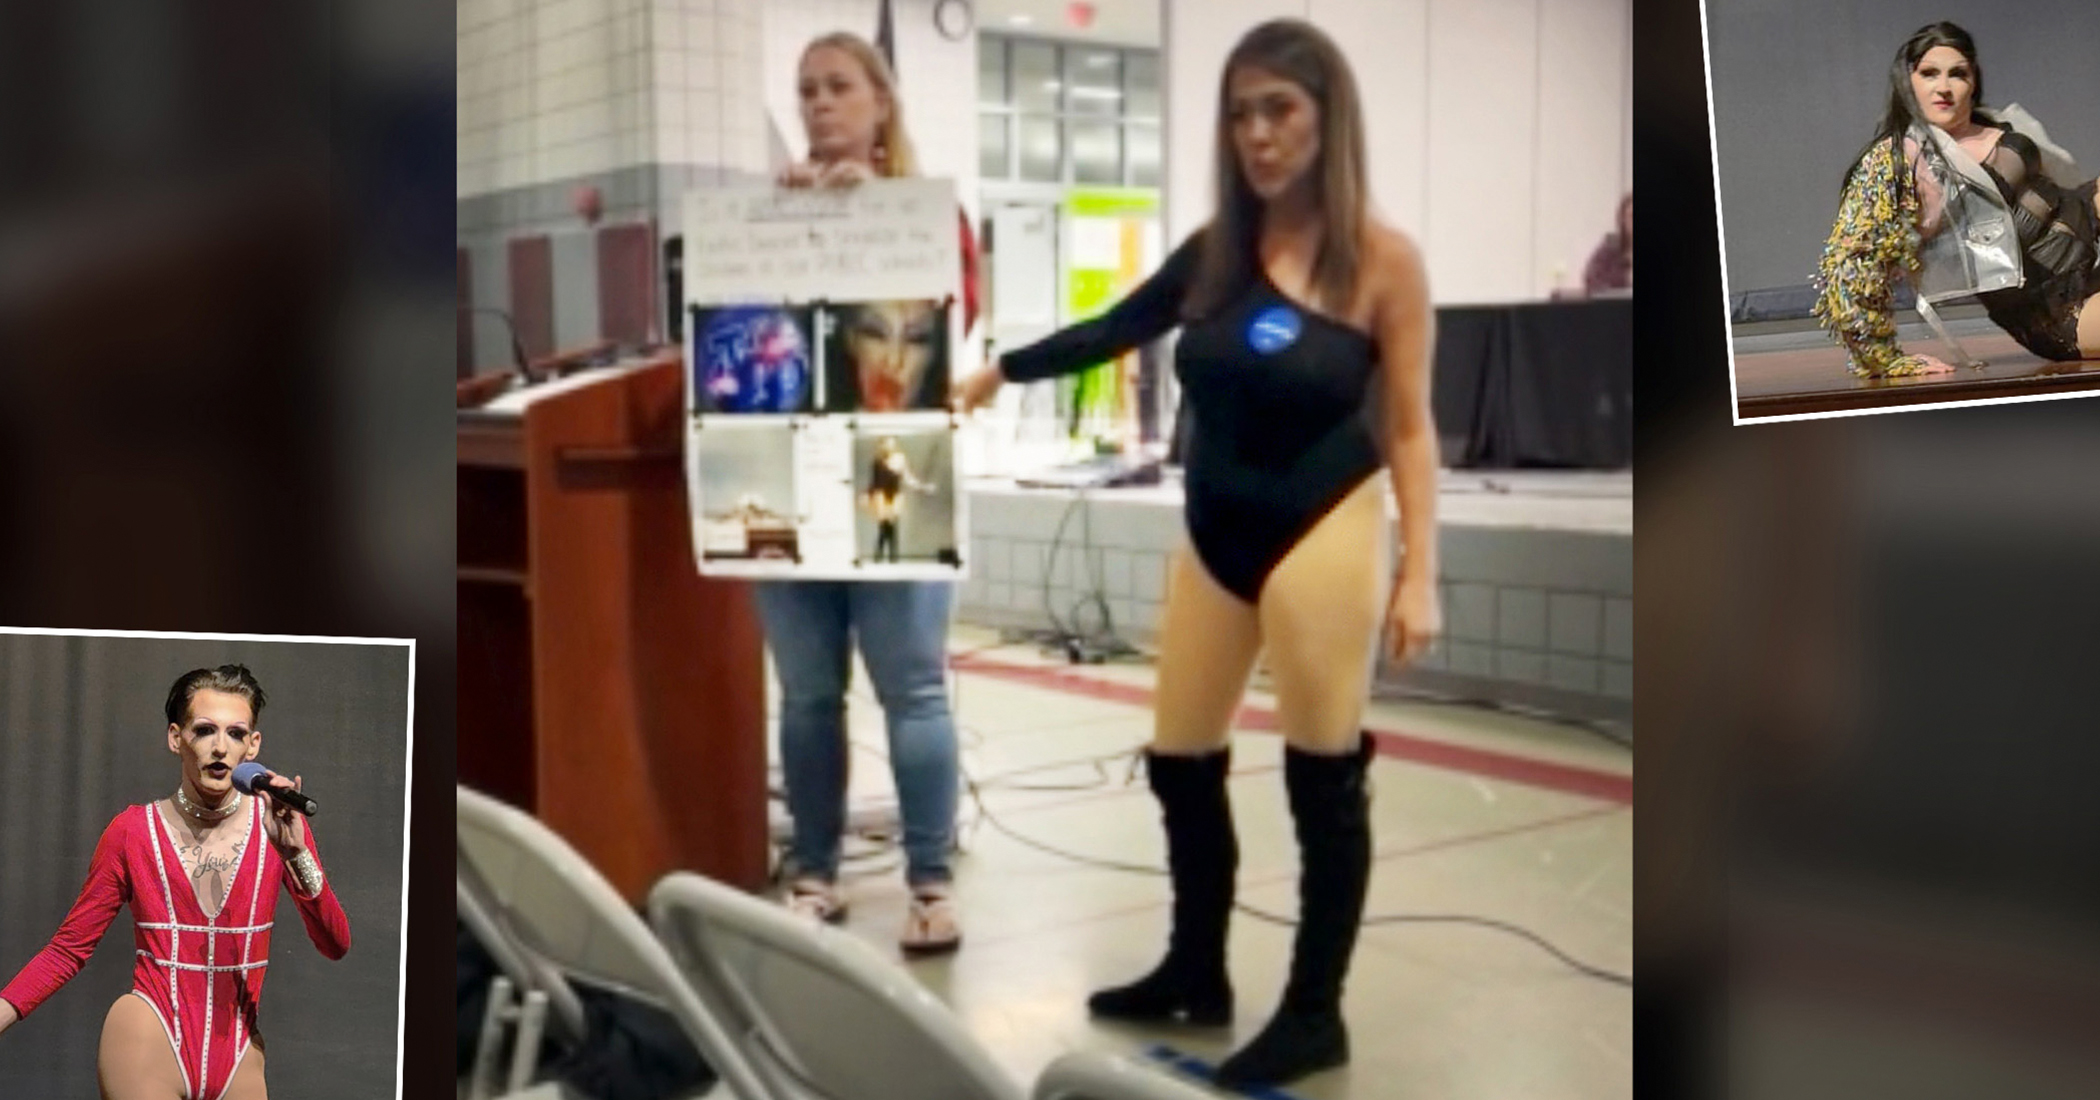 Mom Ambushes School Board by Wearing Drag Queen Costume to Give Them a 'Taste of Their Own Medicine'